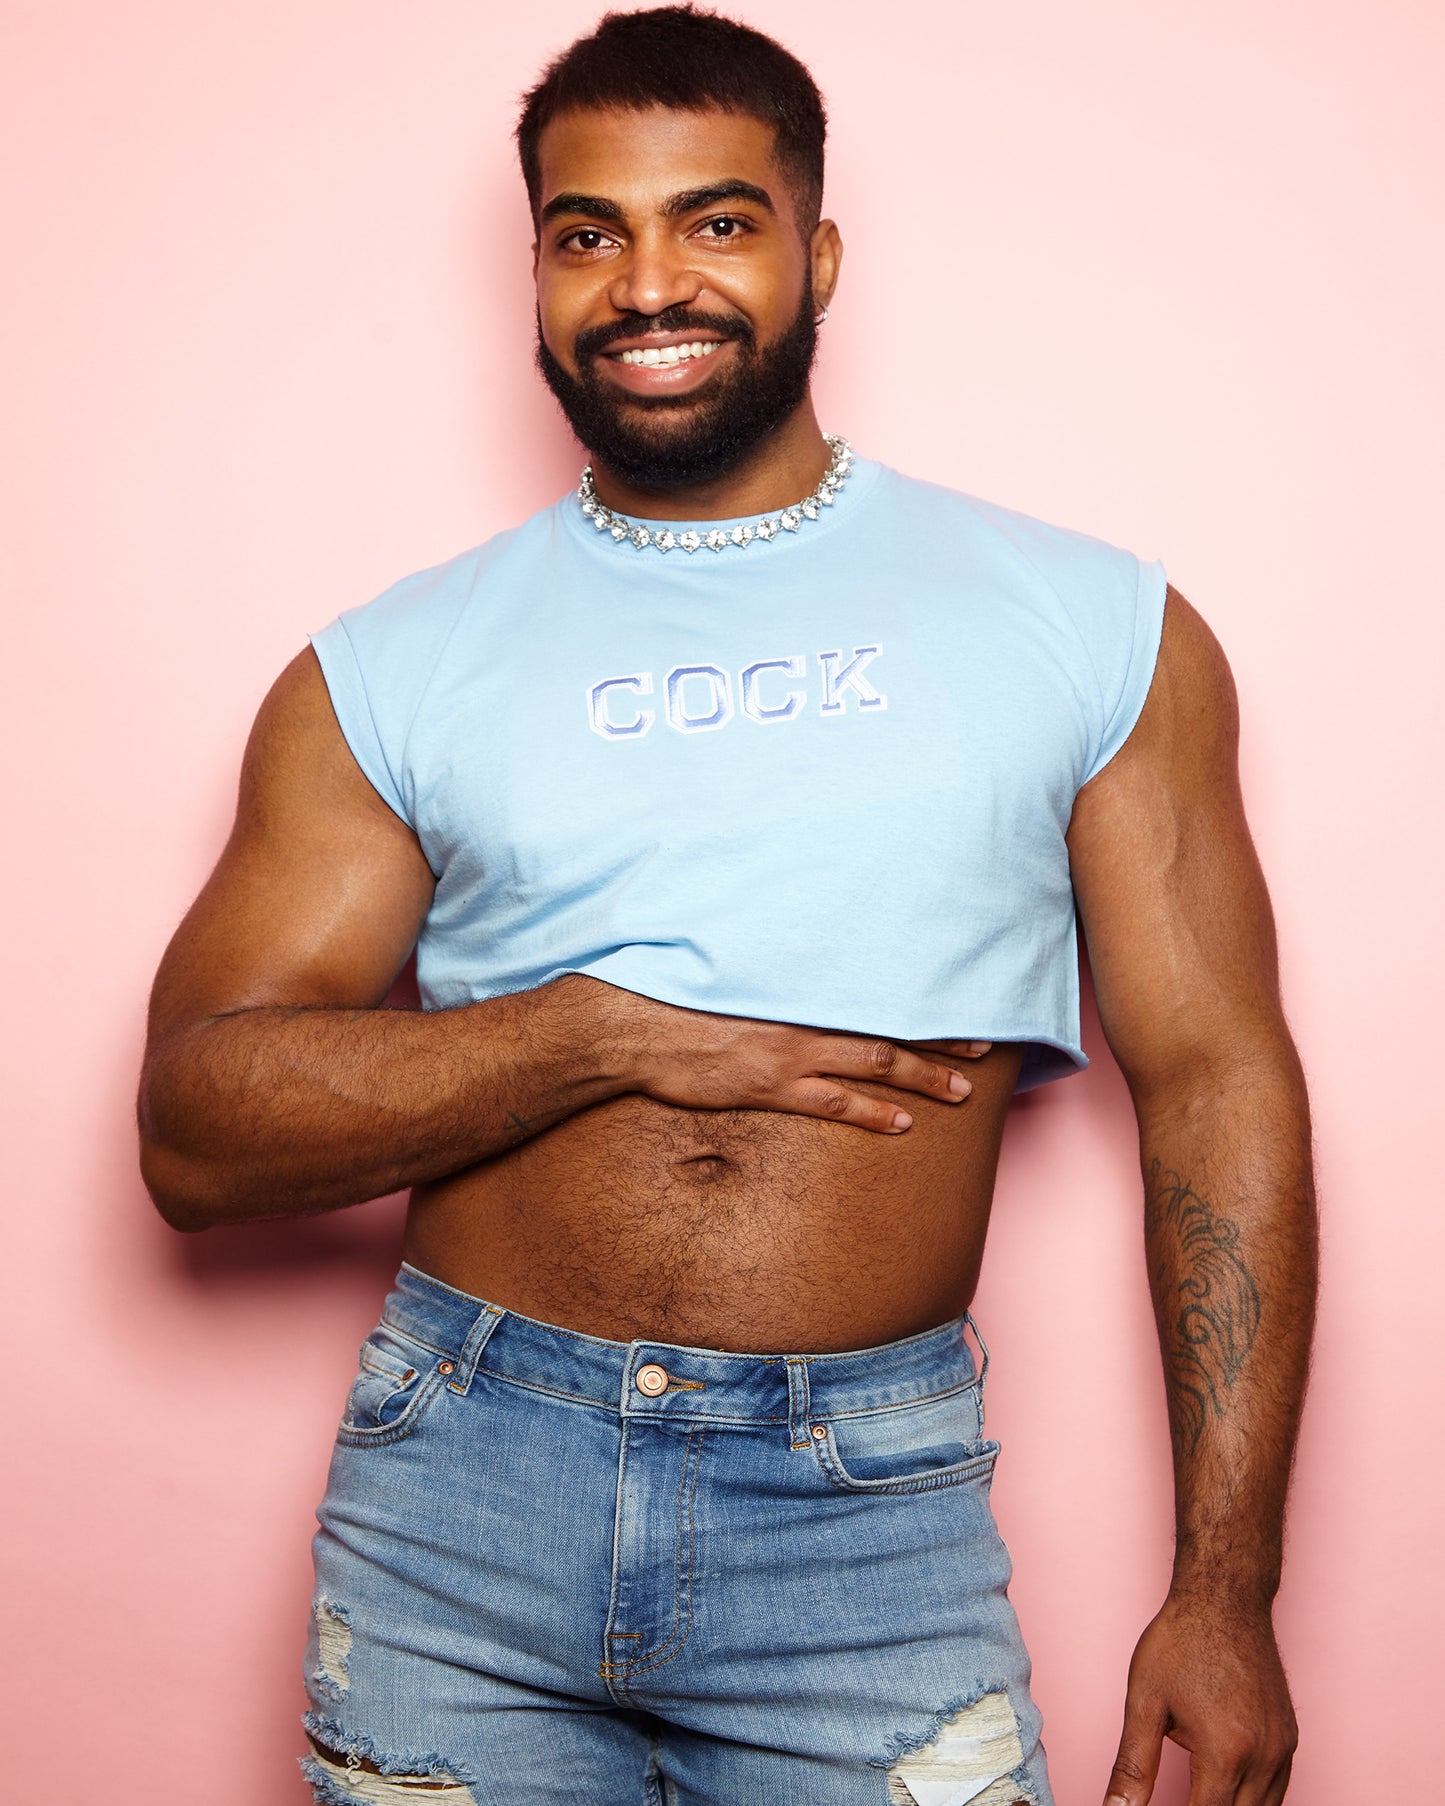 Varsity style cock embroidery on light blue - sleeveless crop top.